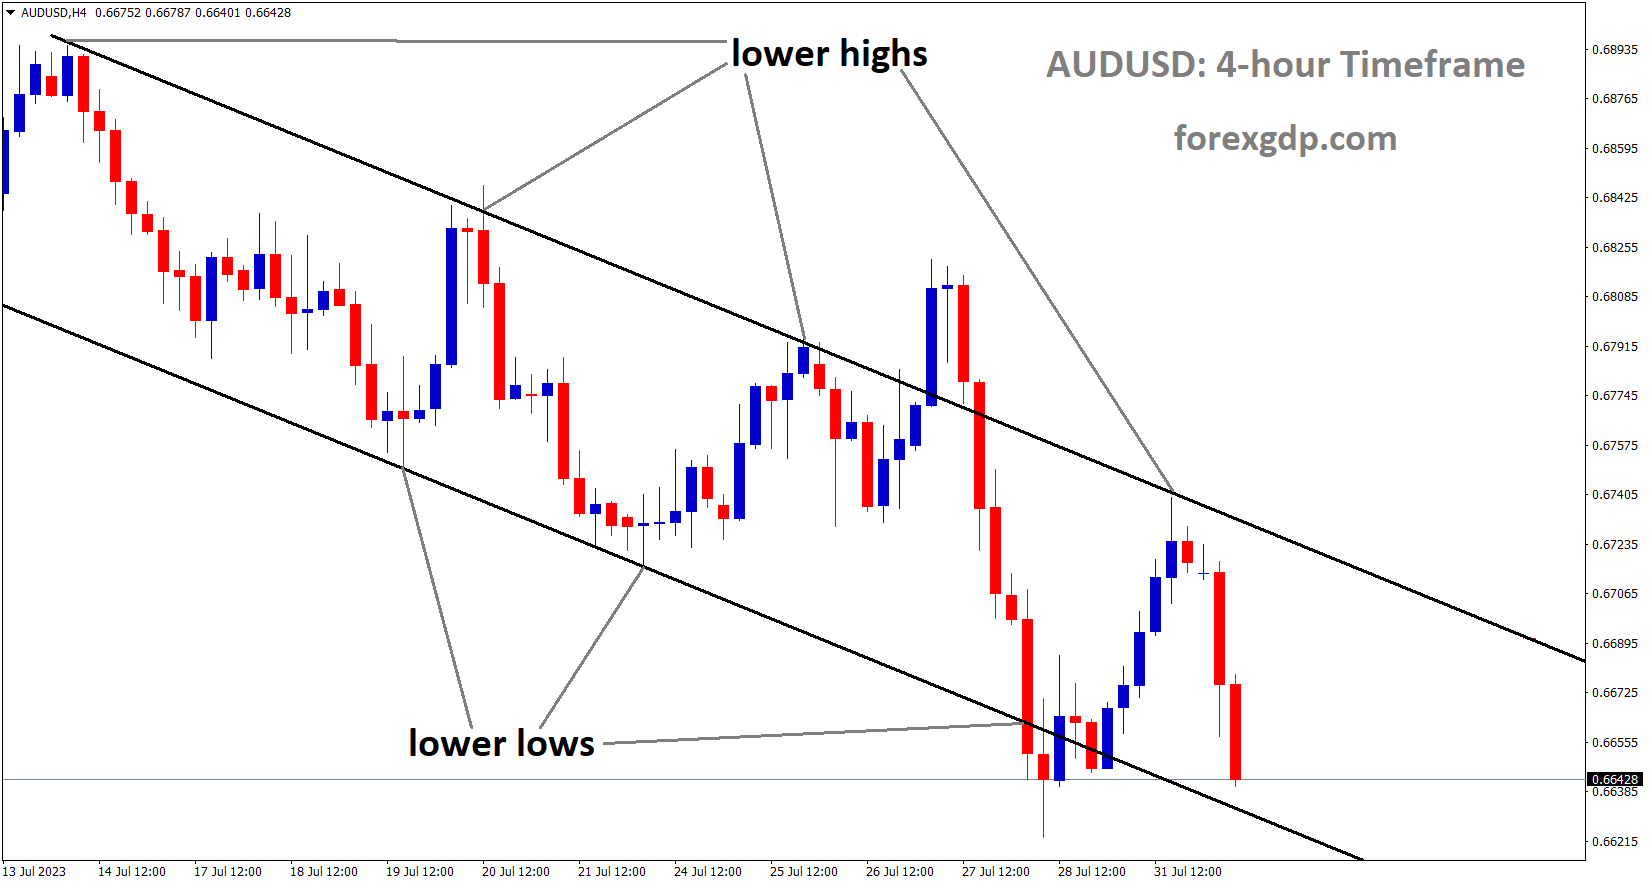 AUDUSD is moving in the Descending channel and the market has reached the lower low area of the channel